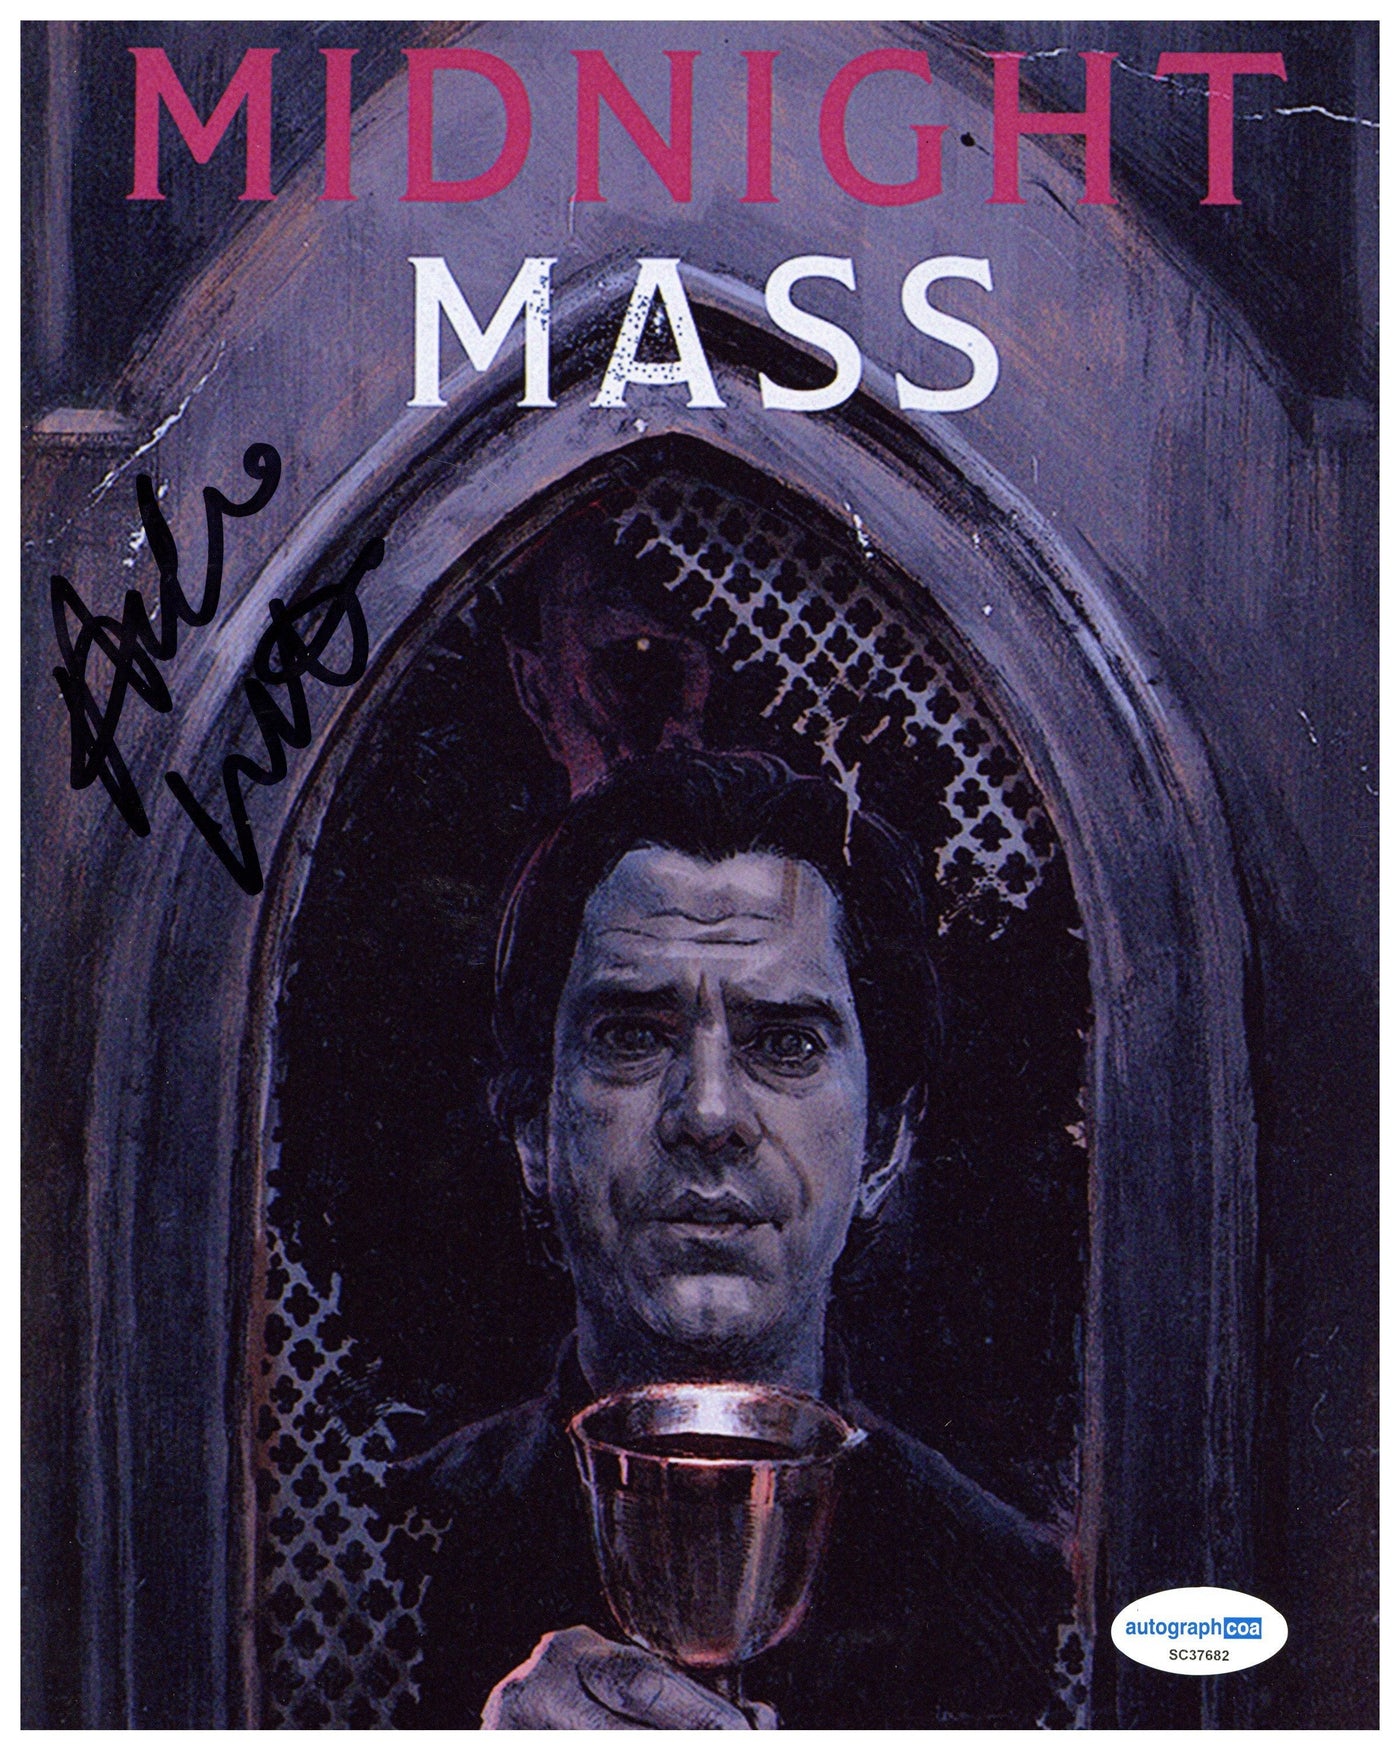 Hamish Linklater Signed 8x10 Photo Midnight Mass Autographed Autograph COA